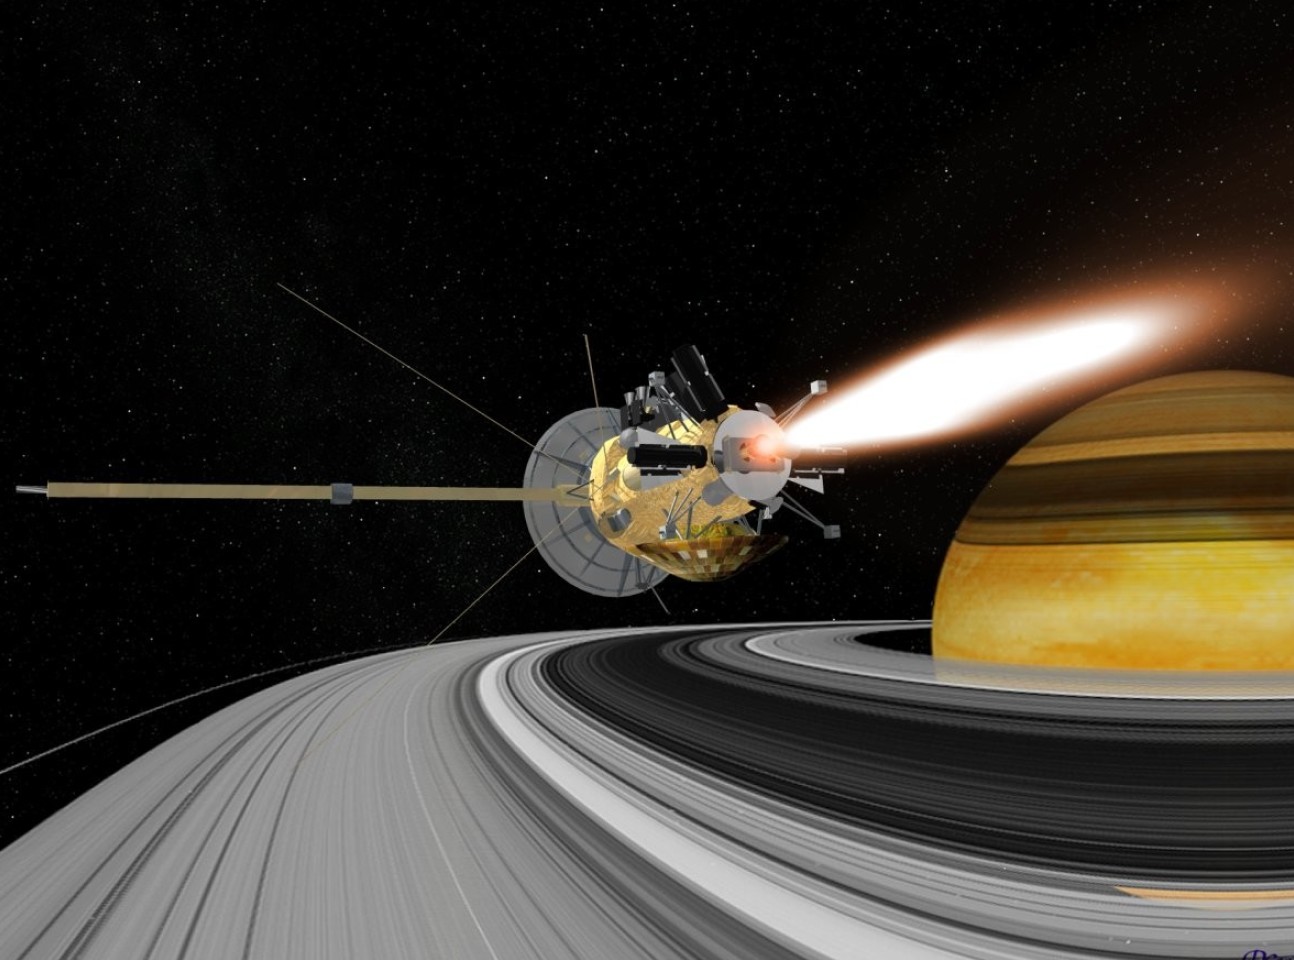 The Cassini space probe approaching Saturn (image credit: NASA)